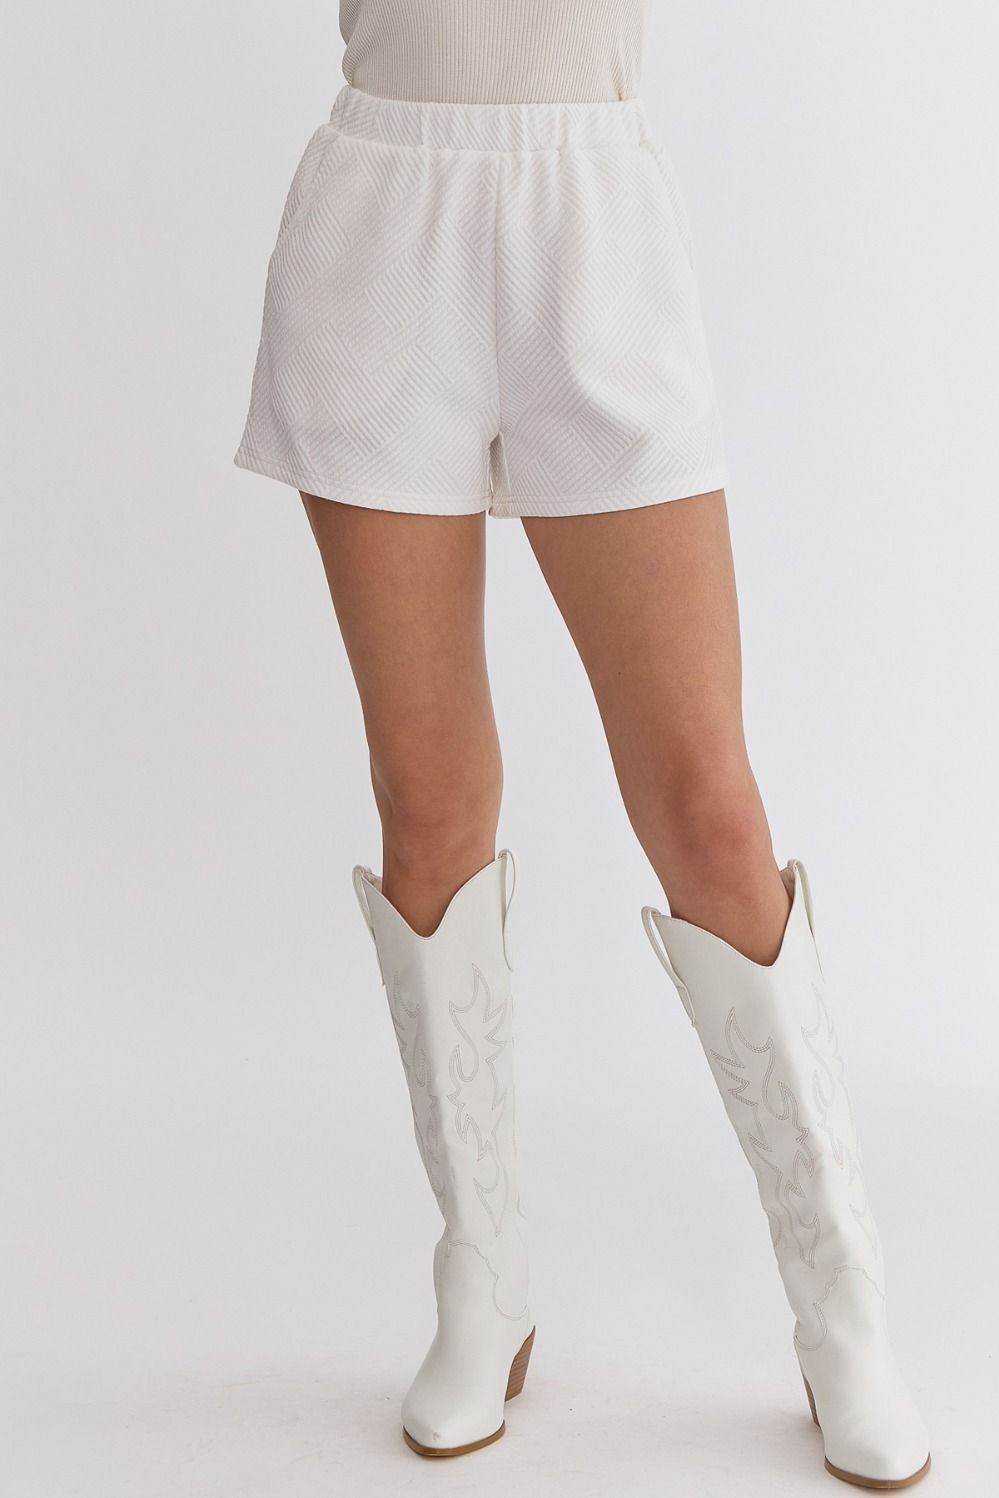 ENTRO INC Women's Shorts OFFWHITE / S Textured High-Waisted Shorts || David's Clothing P22412